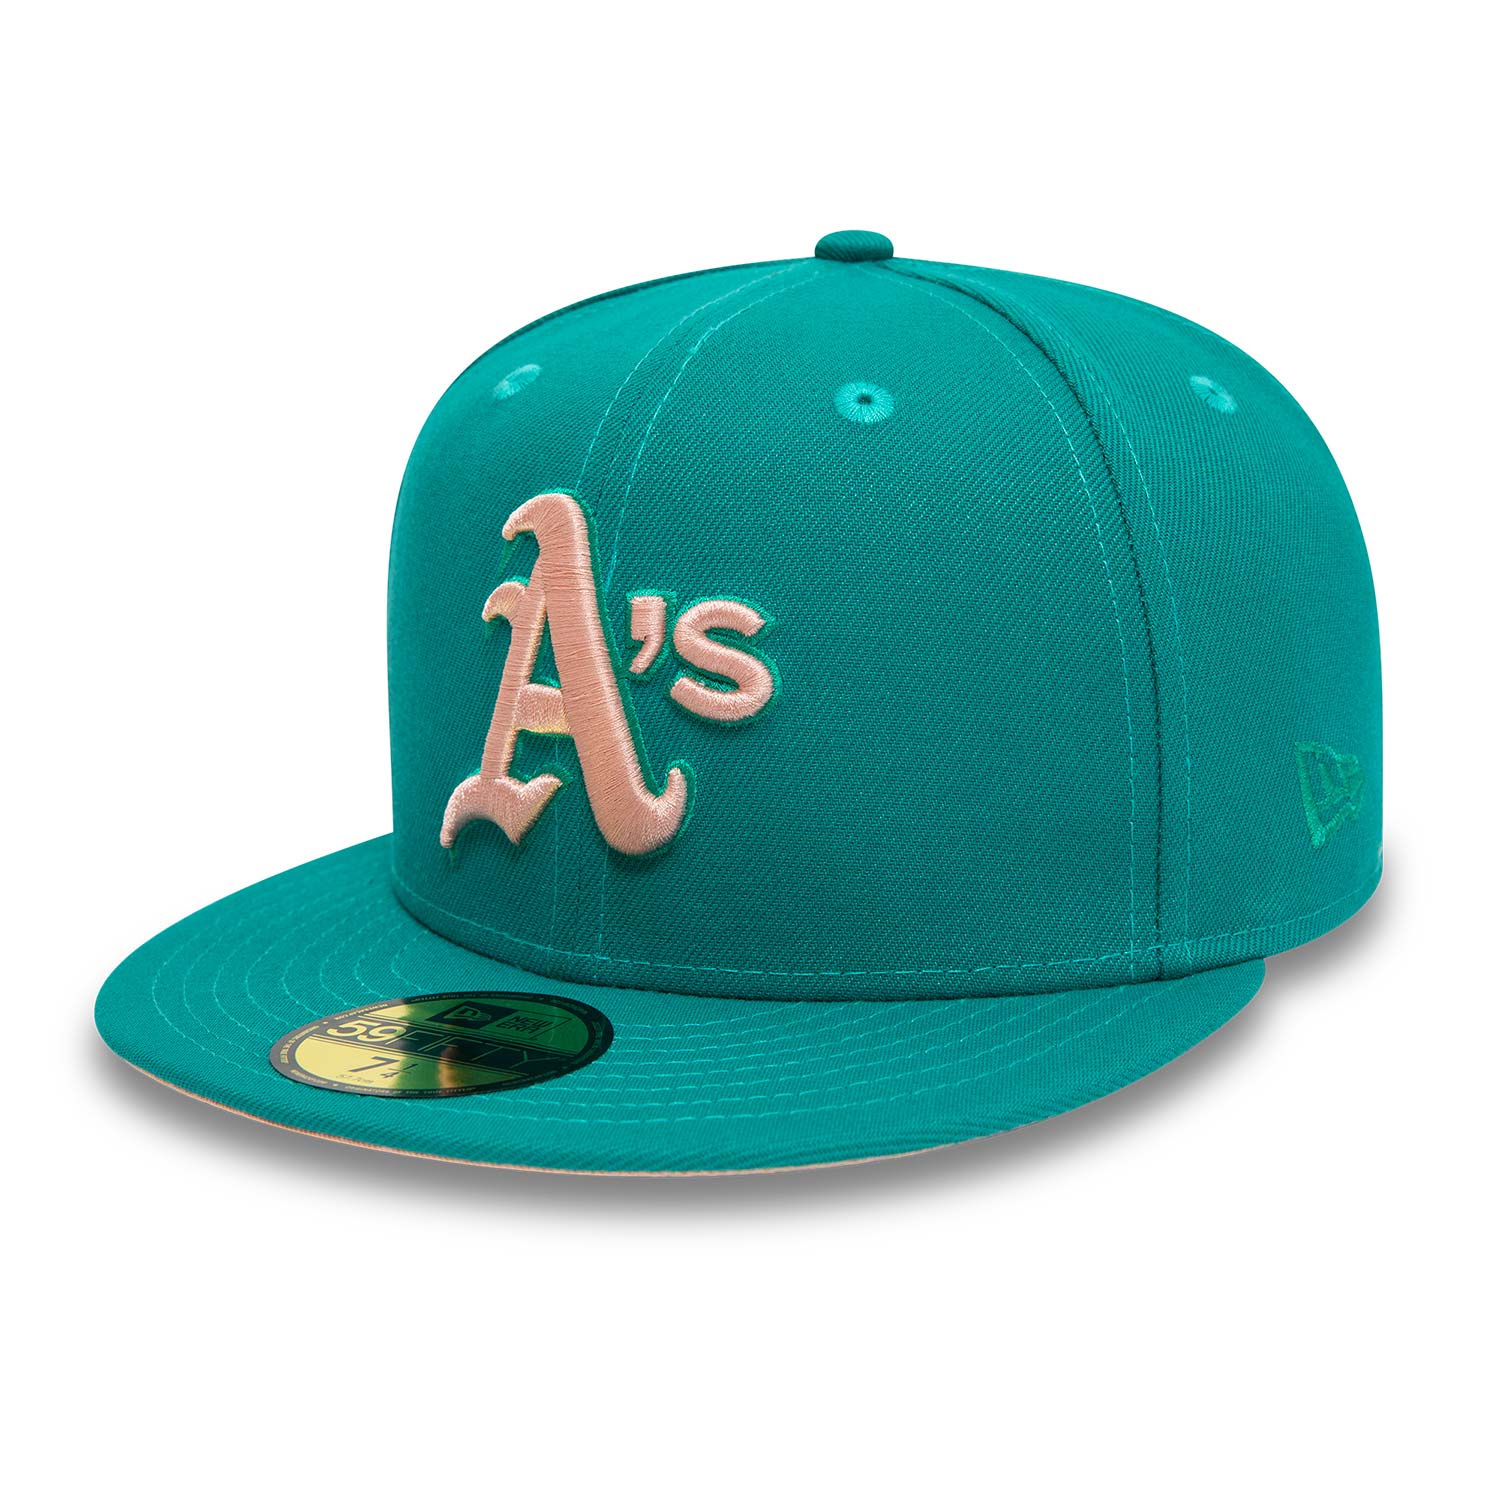 Oakland Athletics World Series Green 59FIFTY Fitted Cap